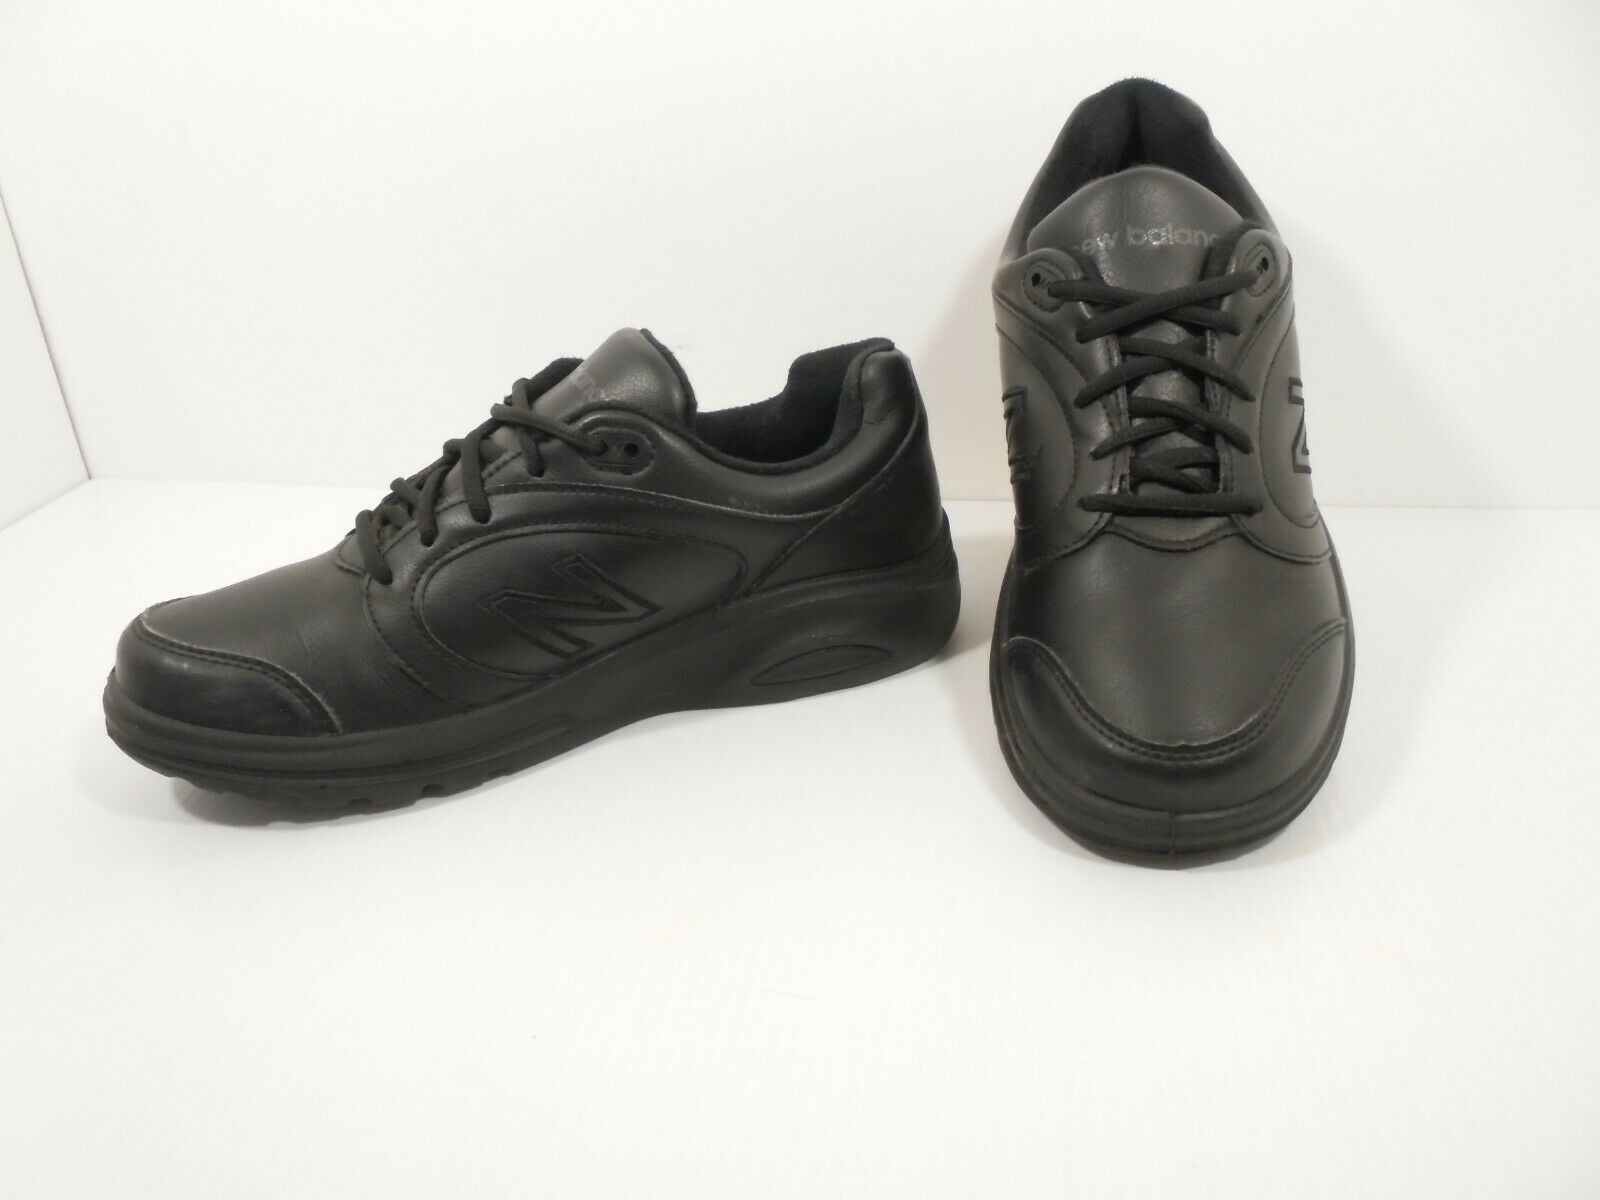 NEW BALANCE Womens 674 Athletic Walking Shoes Black Size 8.5 Wide ...